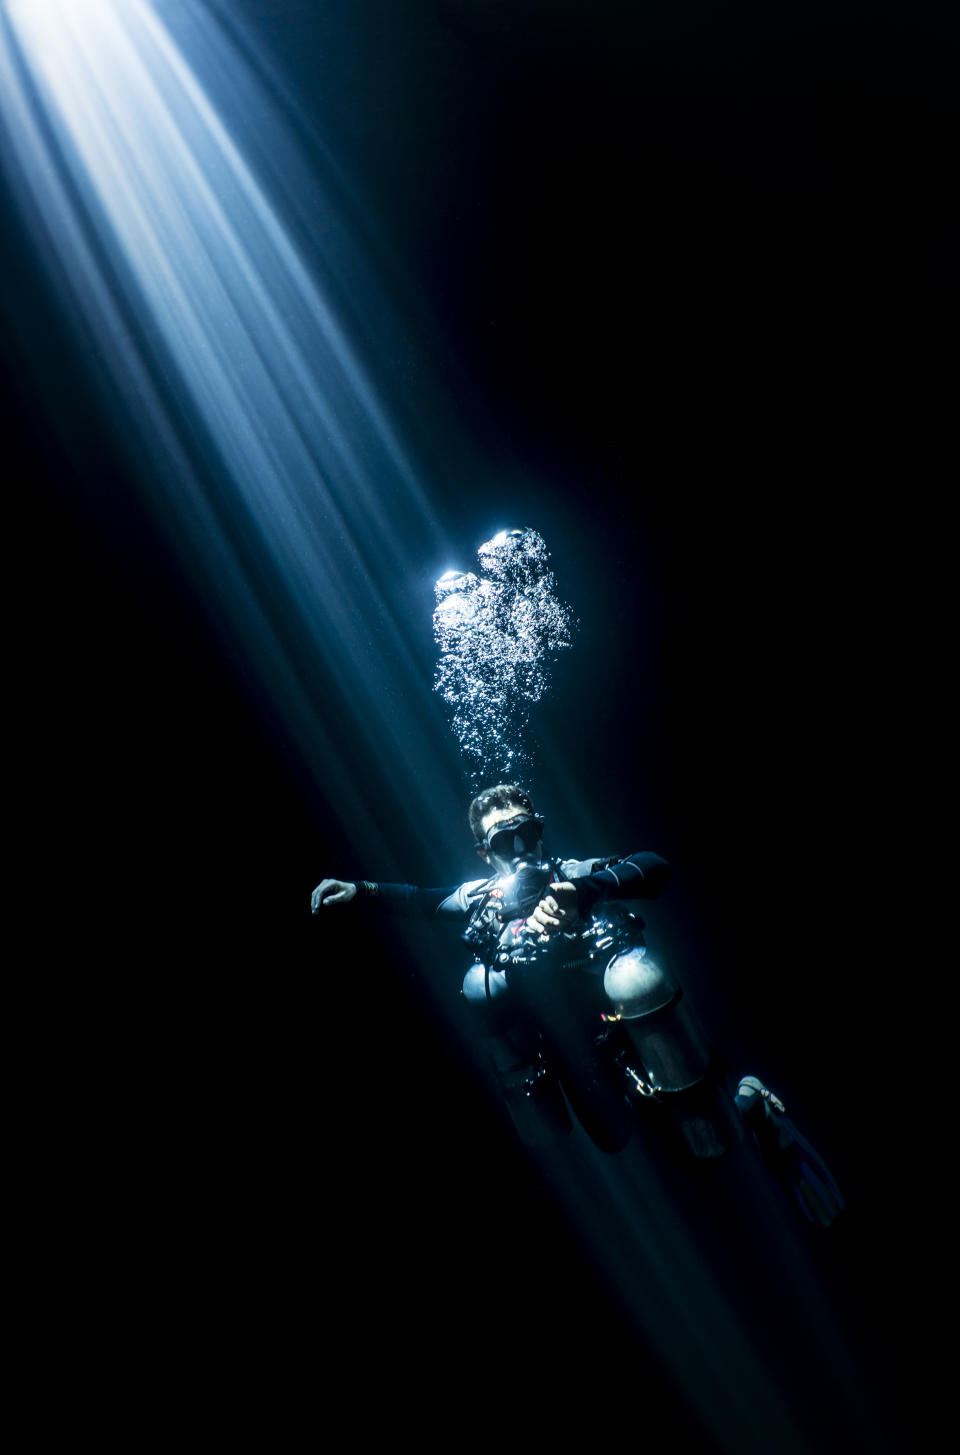 A diver in an underwater cave in the Riviera Maya, Mexico. (Martin Broen/Caters News)